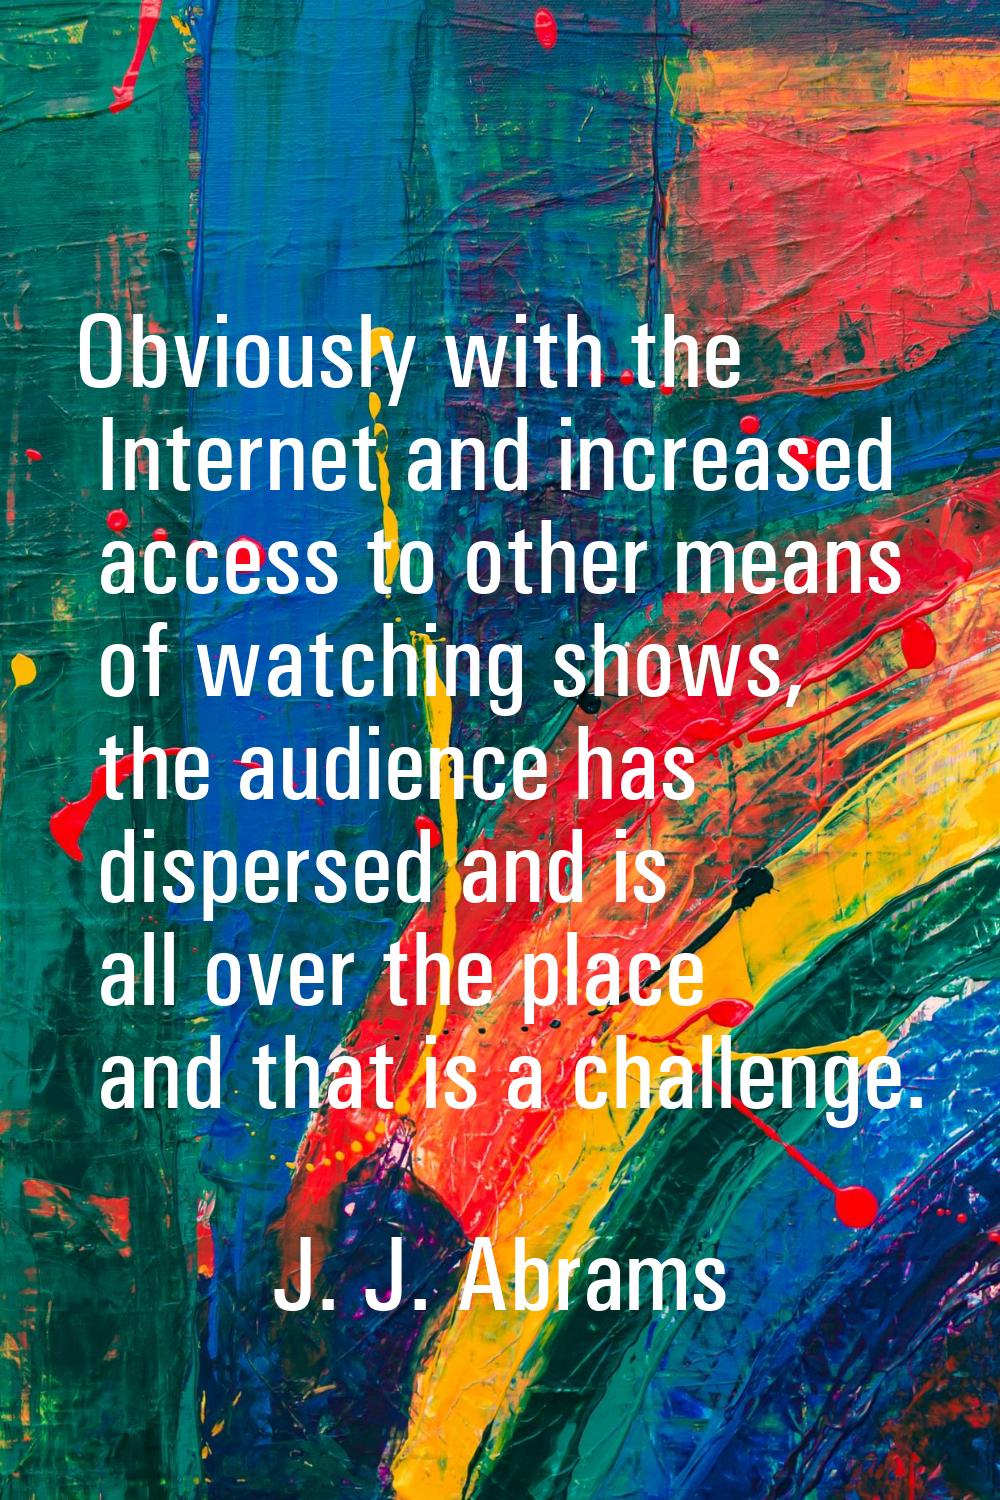 Obviously with the Internet and increased access to other means of watching shows, the audience has